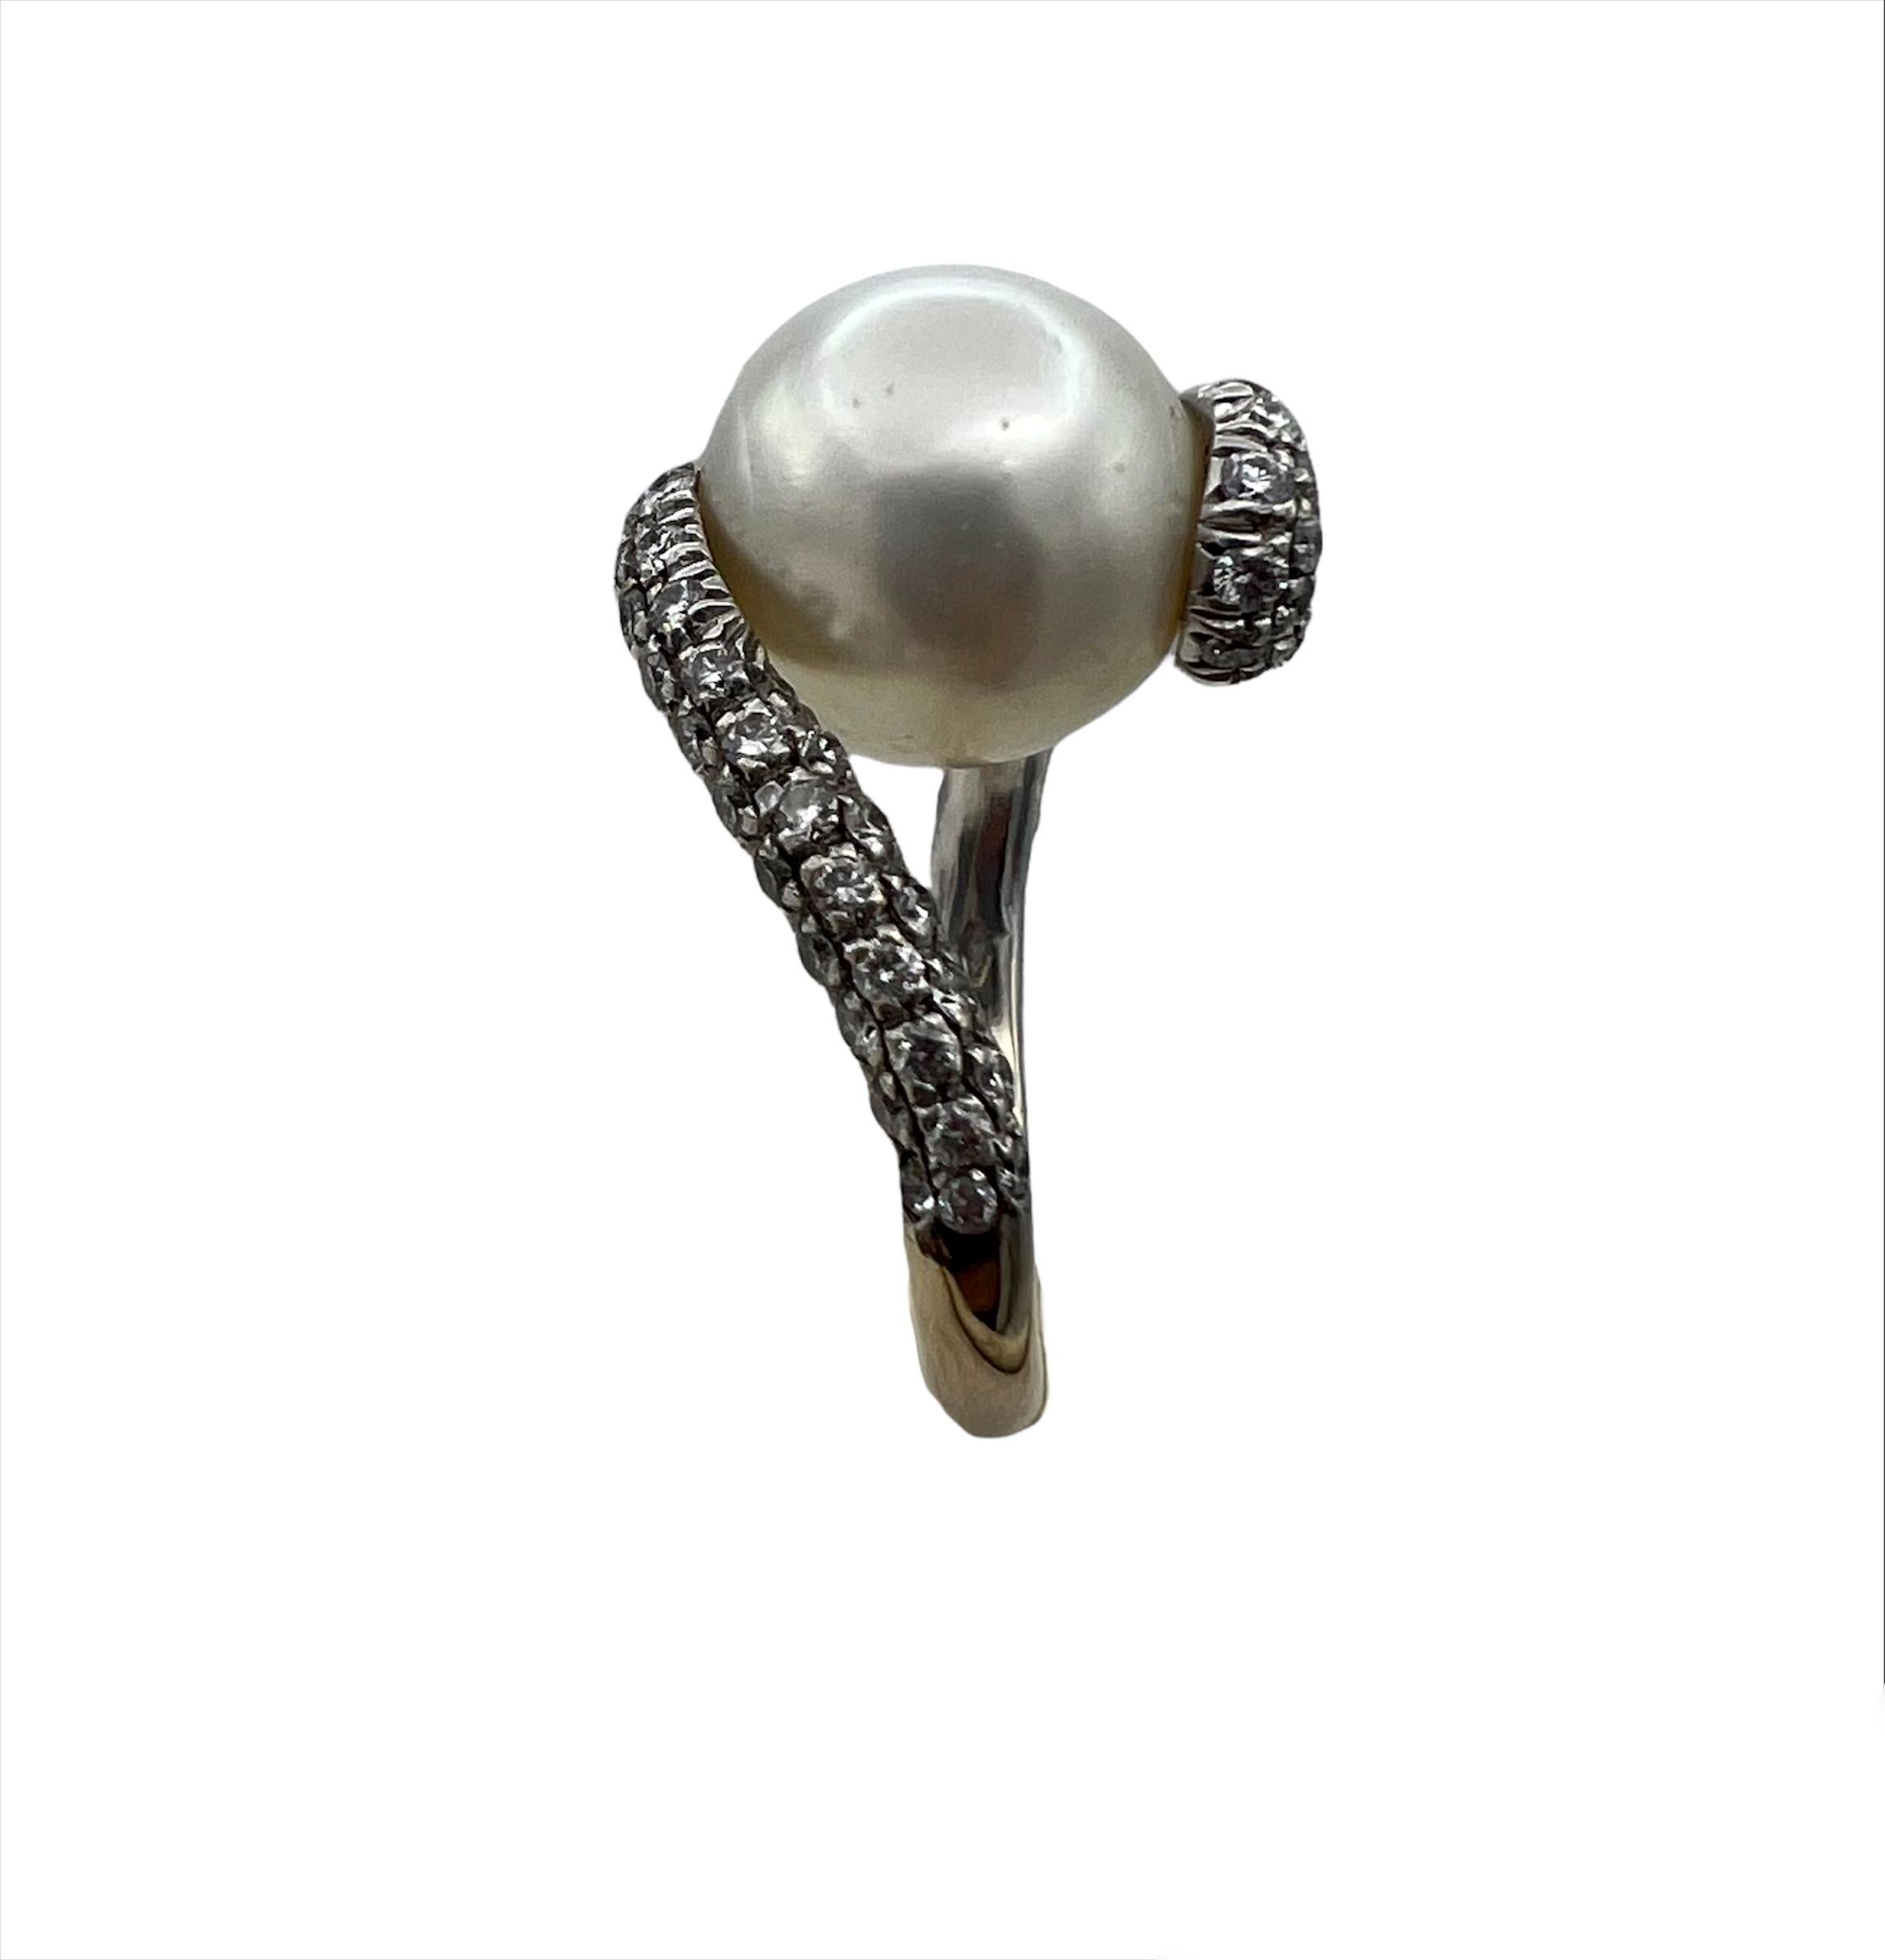 The ring features white cultured pearl, approx. 11.5mm, accented with 0.68 carats of round brilliant cut diamonds around it and set in 18k white gold.
Band width is 2.4 mm.
Ring size is 7.25.
Total weight is 8.1 grams.
Hallmarks: 750 and M for